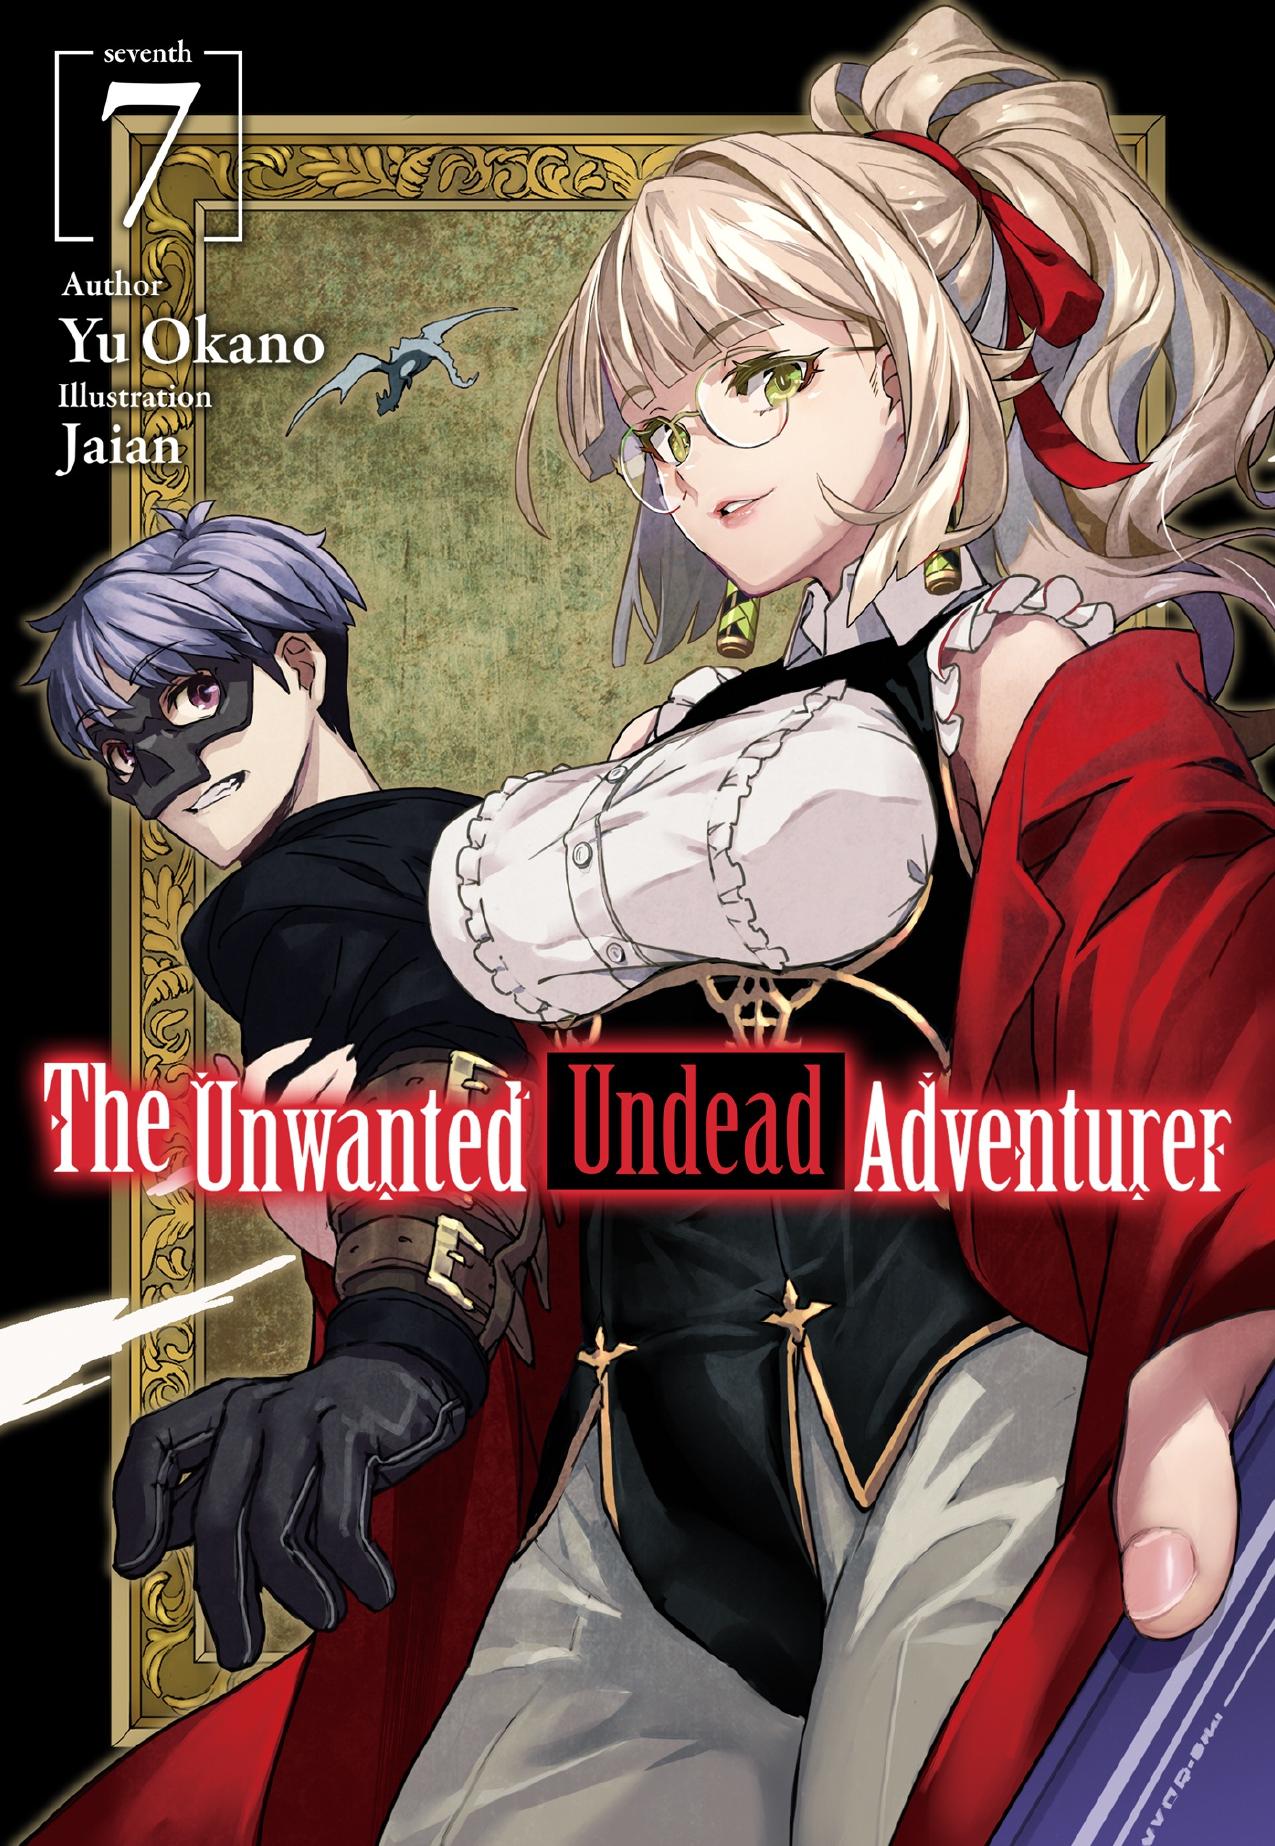 The Unwanted Undead Adventurer: Volume 7 by Yu Okano